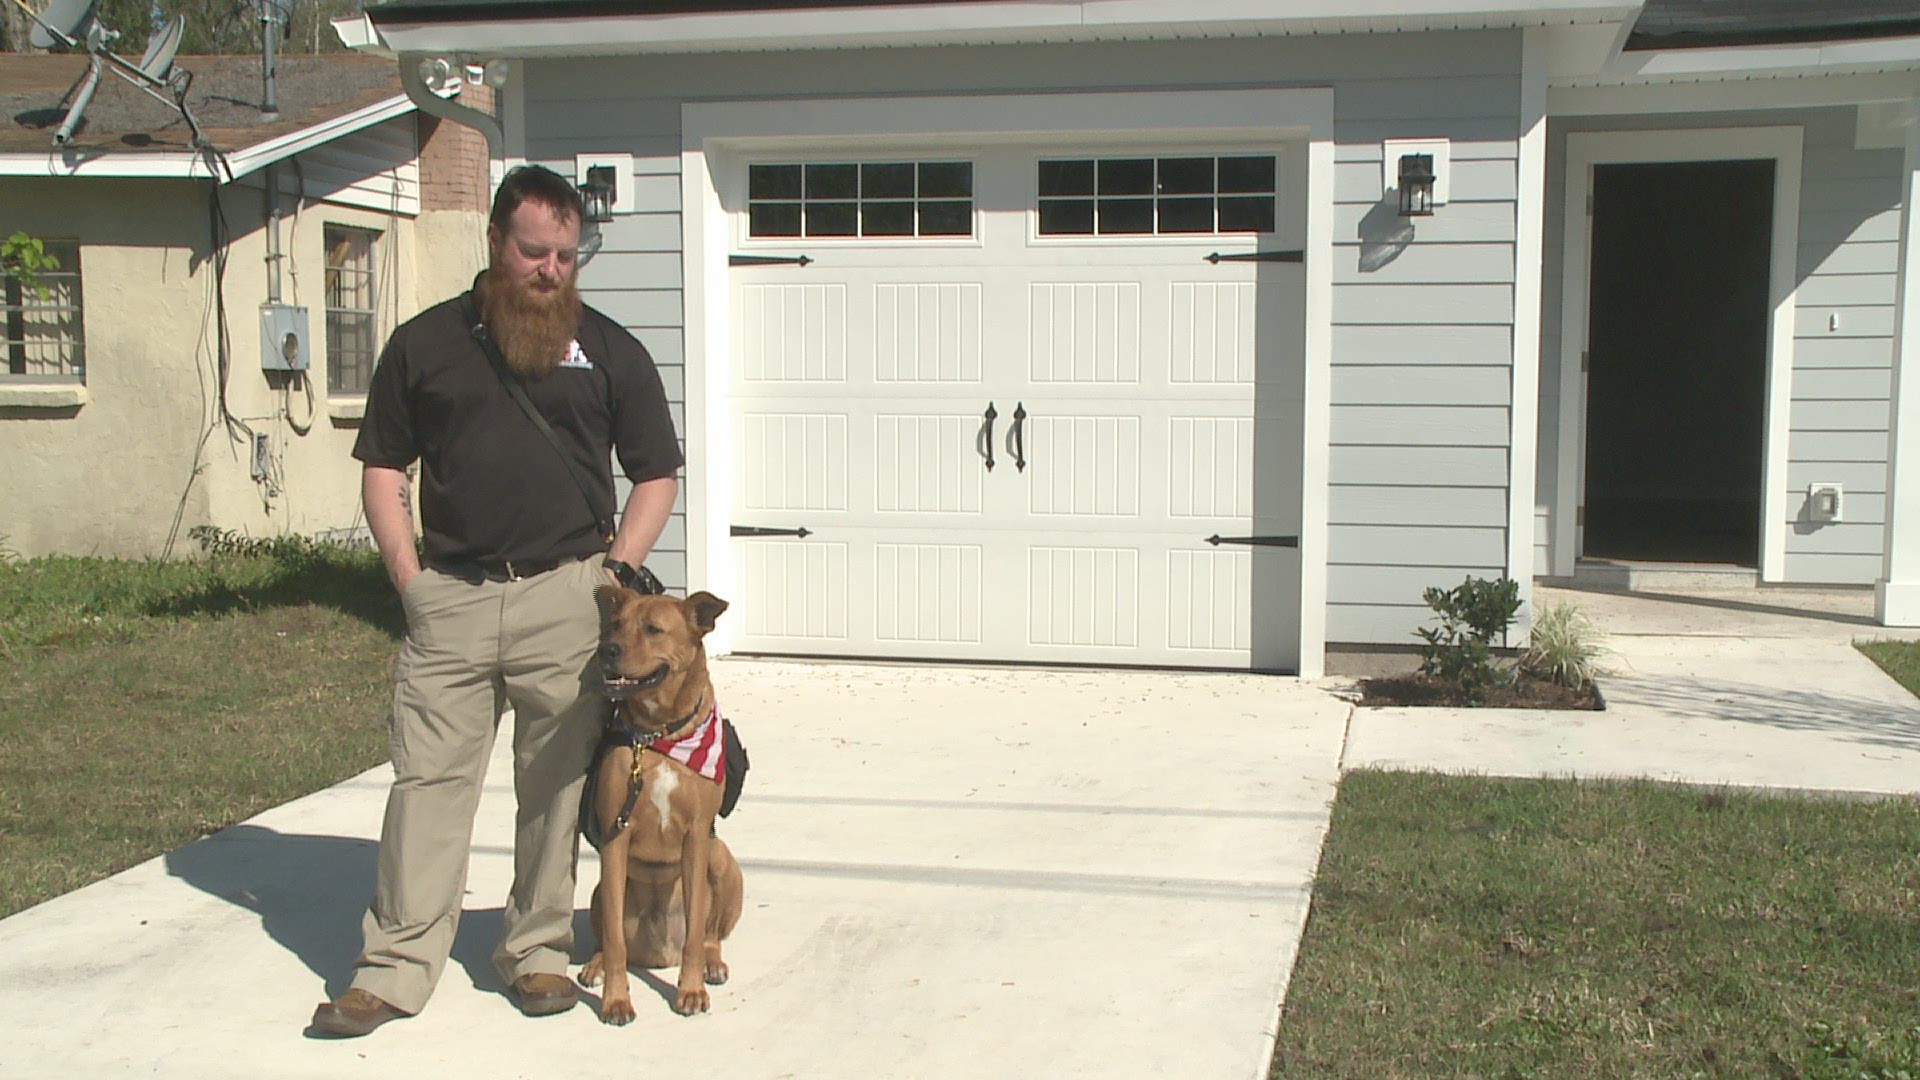 This week, a home was donated to Rutland, free of charge, to help him get back on his feet and have a fresh start.